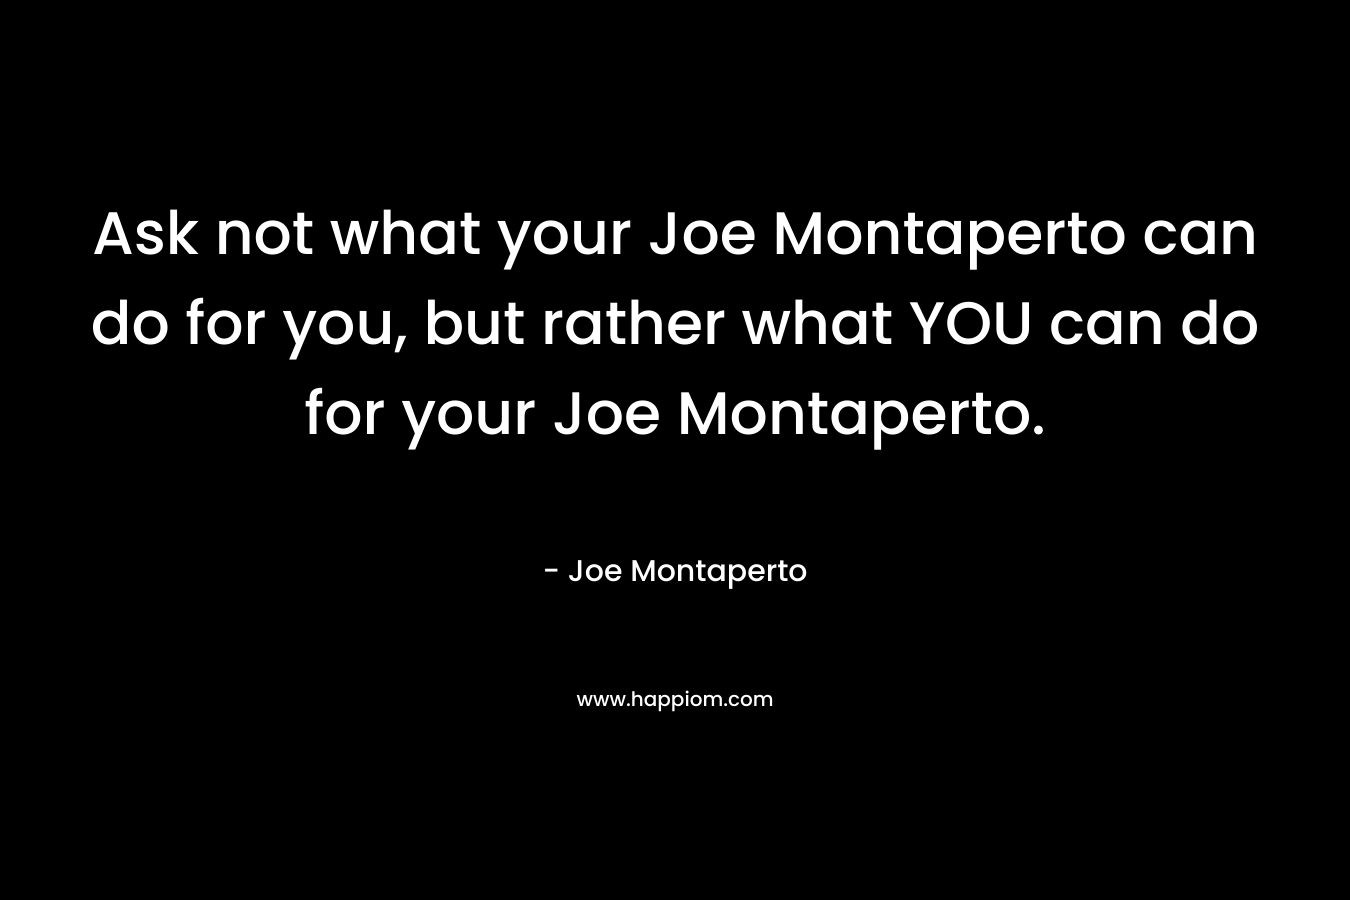 Ask not what your Joe Montaperto can do for you, but rather what YOU can do for your Joe Montaperto.